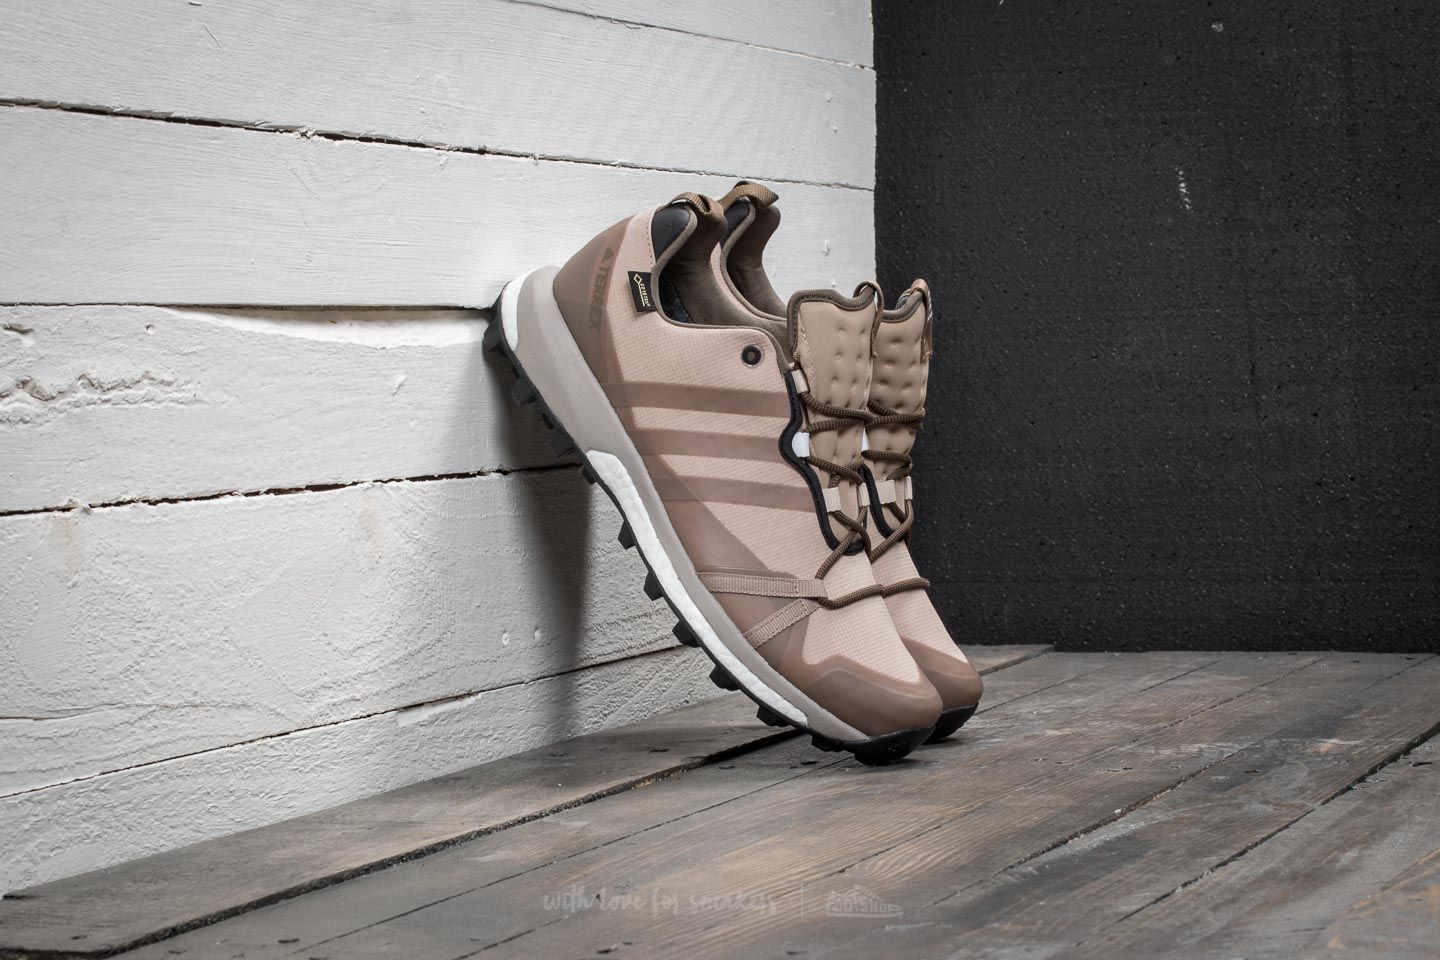 Chaussures et baskets homme adidas Consortium x Norse Projects Terrex Agravic Beige/ Light Brown